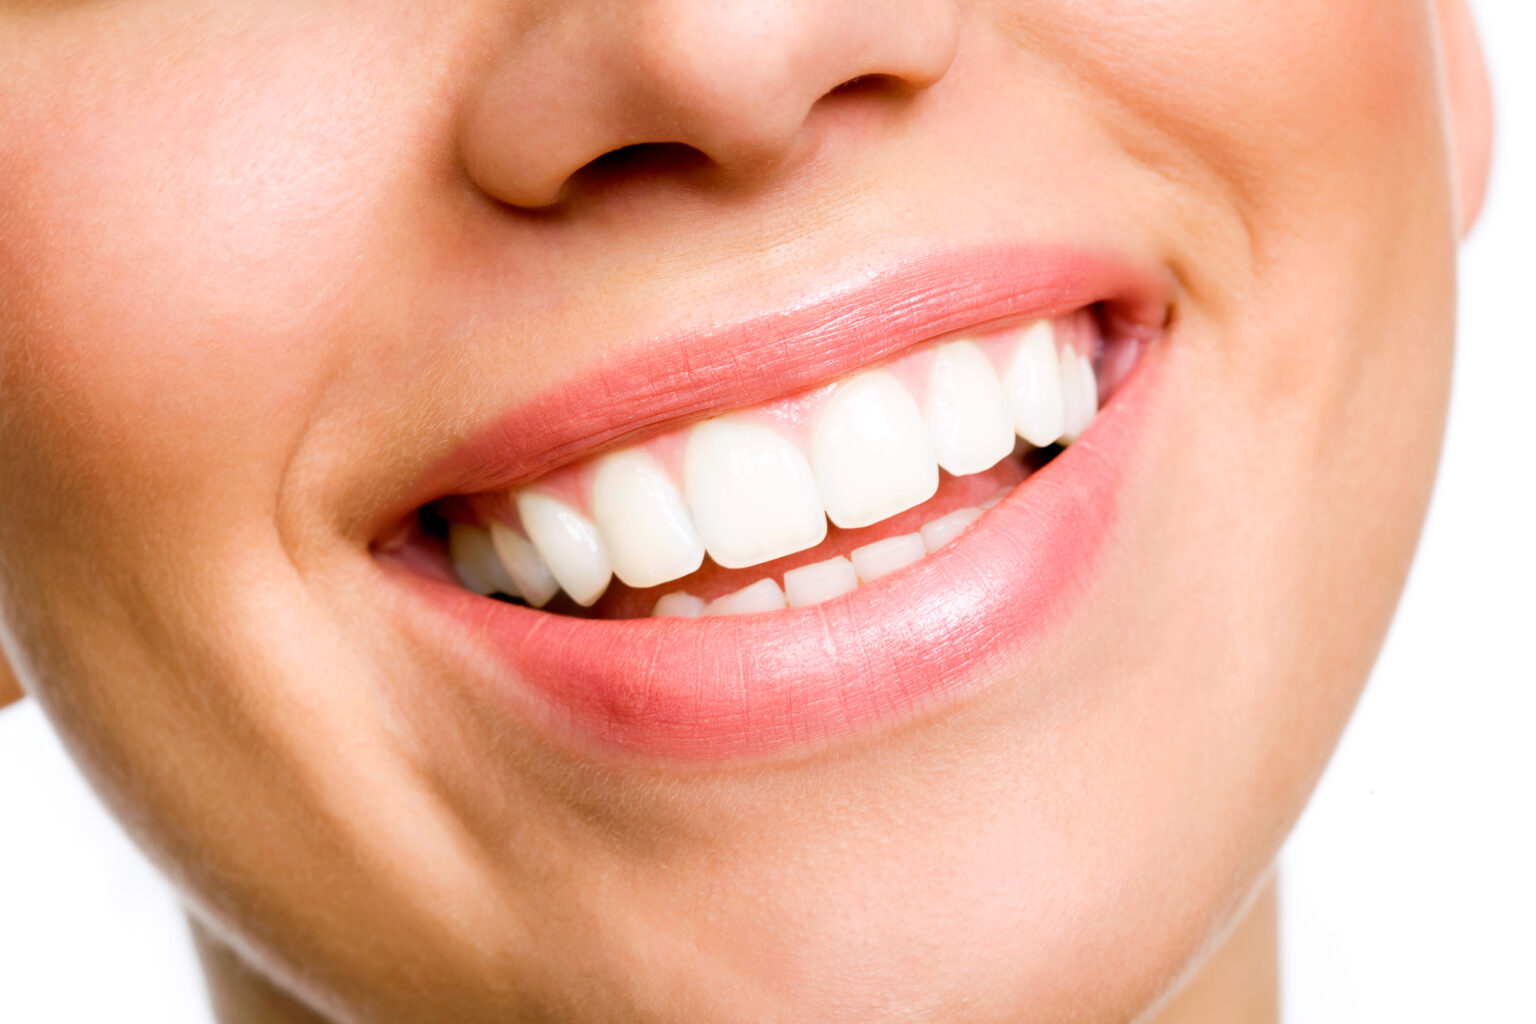 Close-up of a woman's smile showing healthy teeth thanks to Dallas dentistry.